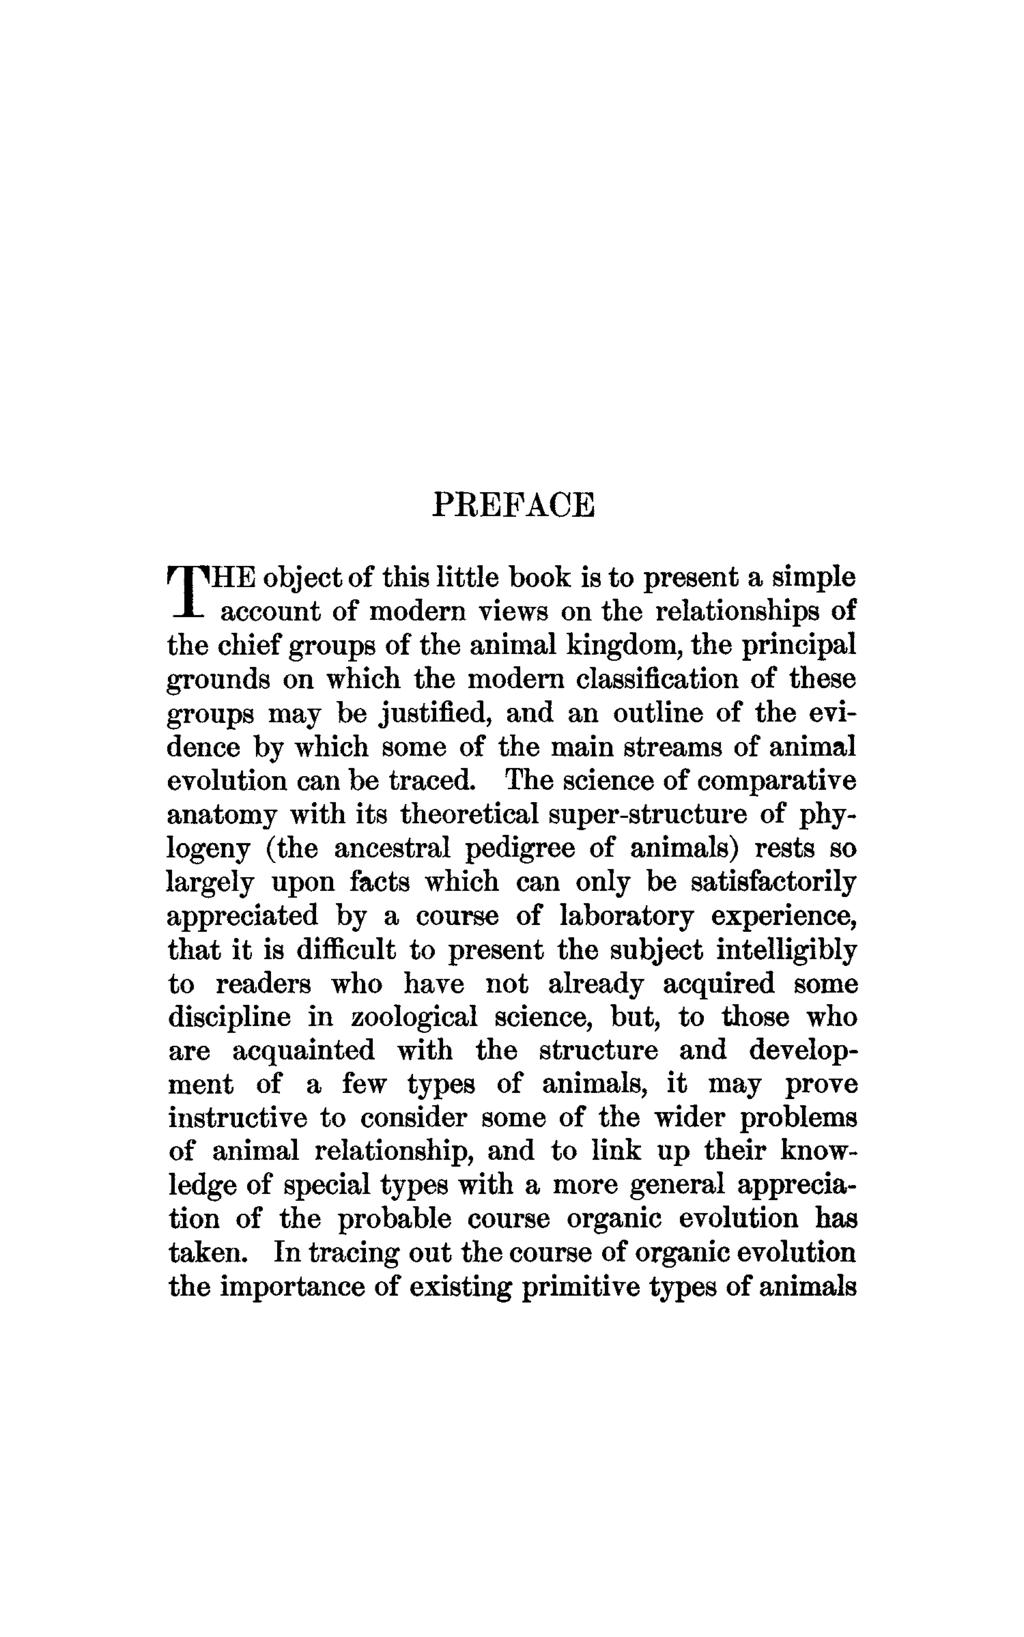 PREFACE THE object of this little book is to present a simple account of modern views on the relationships of the chief groups of the animal kingdom, the principal grounds on which the modern